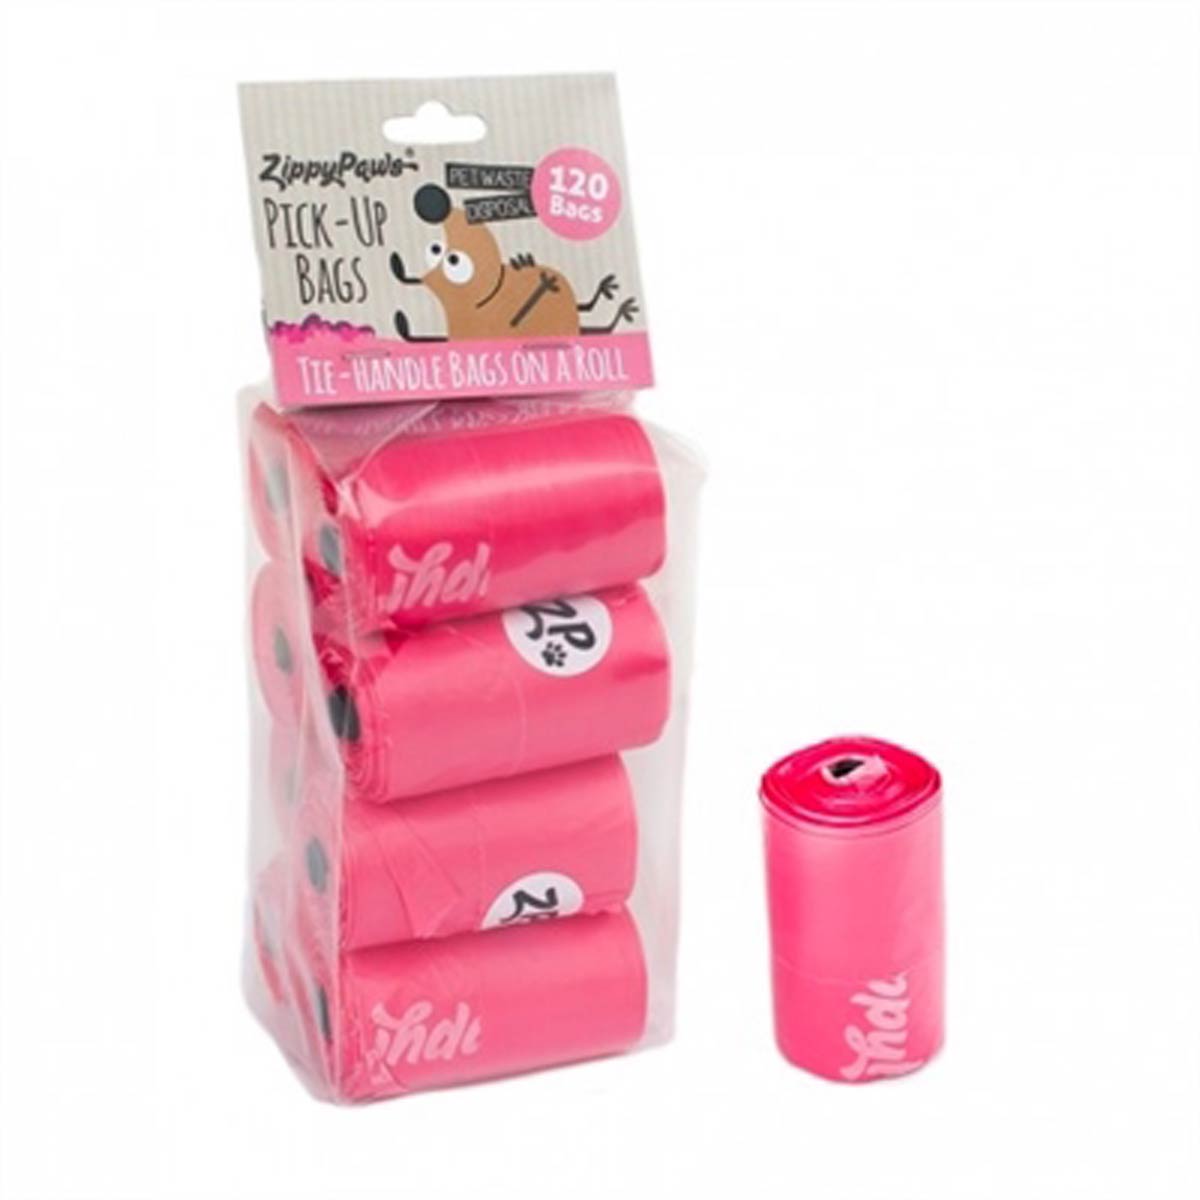 ZippyPaws Unscented Pick-Up Waste Bags - Pink at BaxterBoo